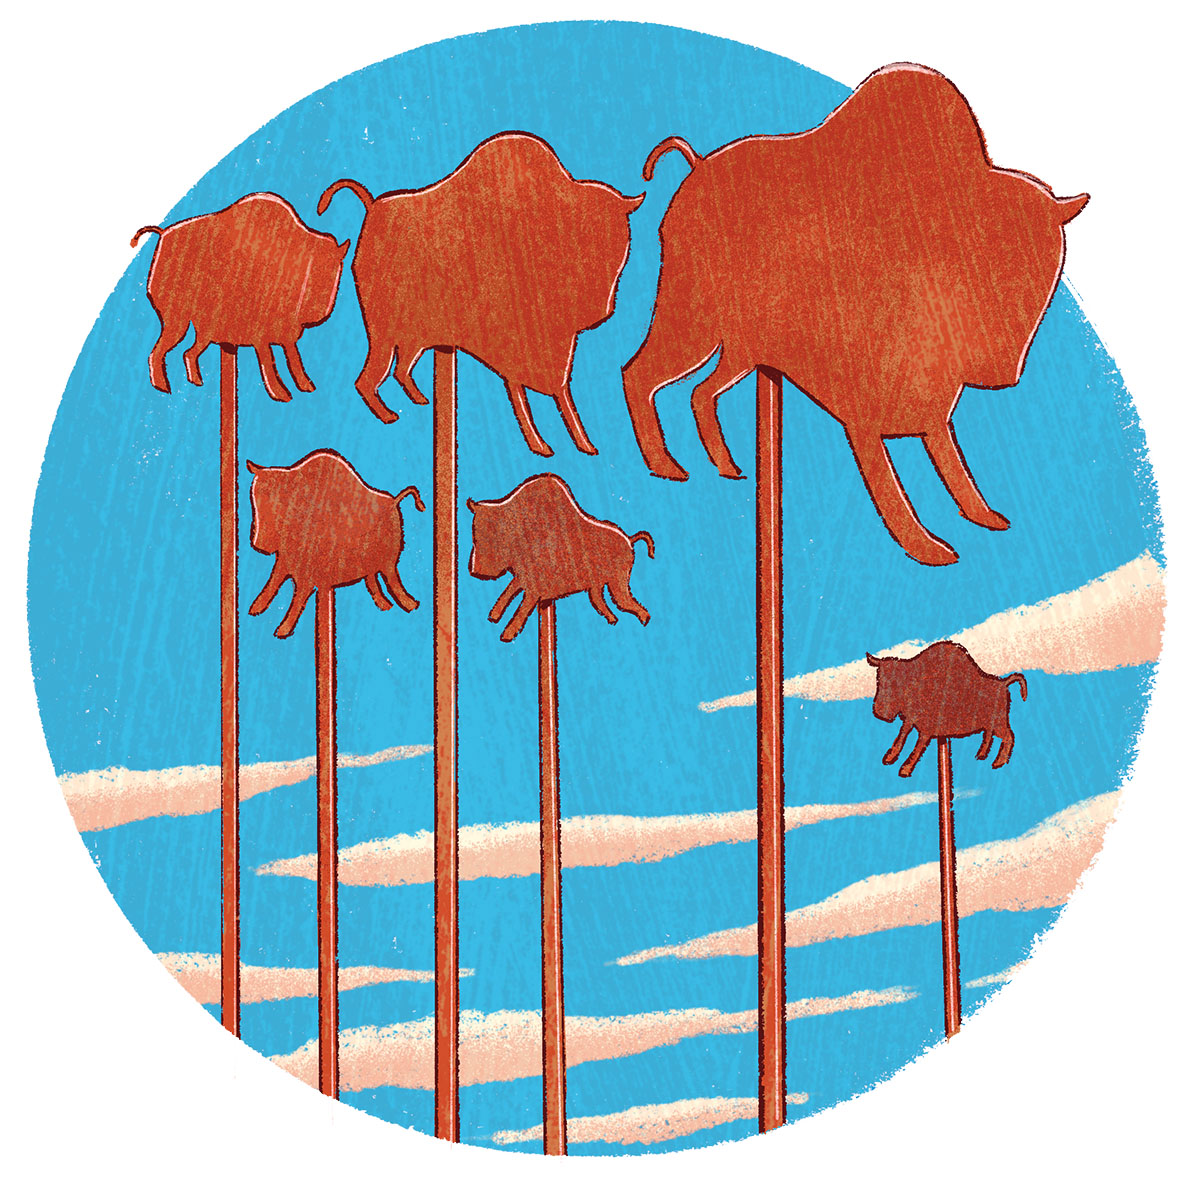 An illustration of rust-colored buffalo in front of a blue background